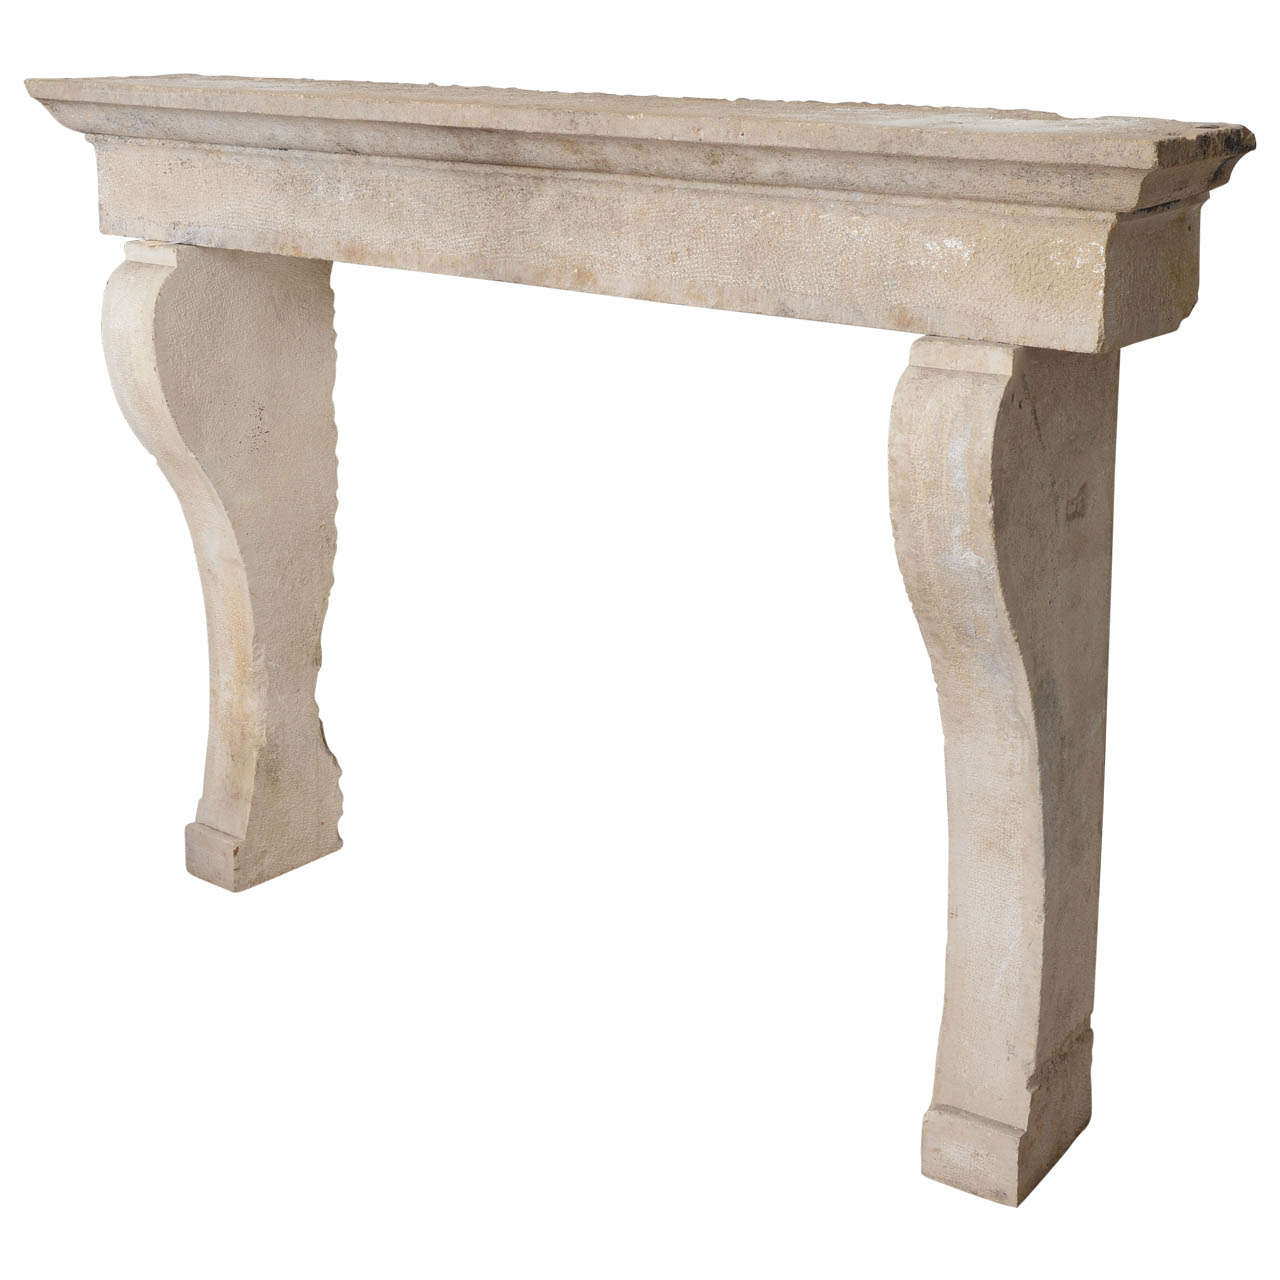 18th Century French Stone Mantel For Sale